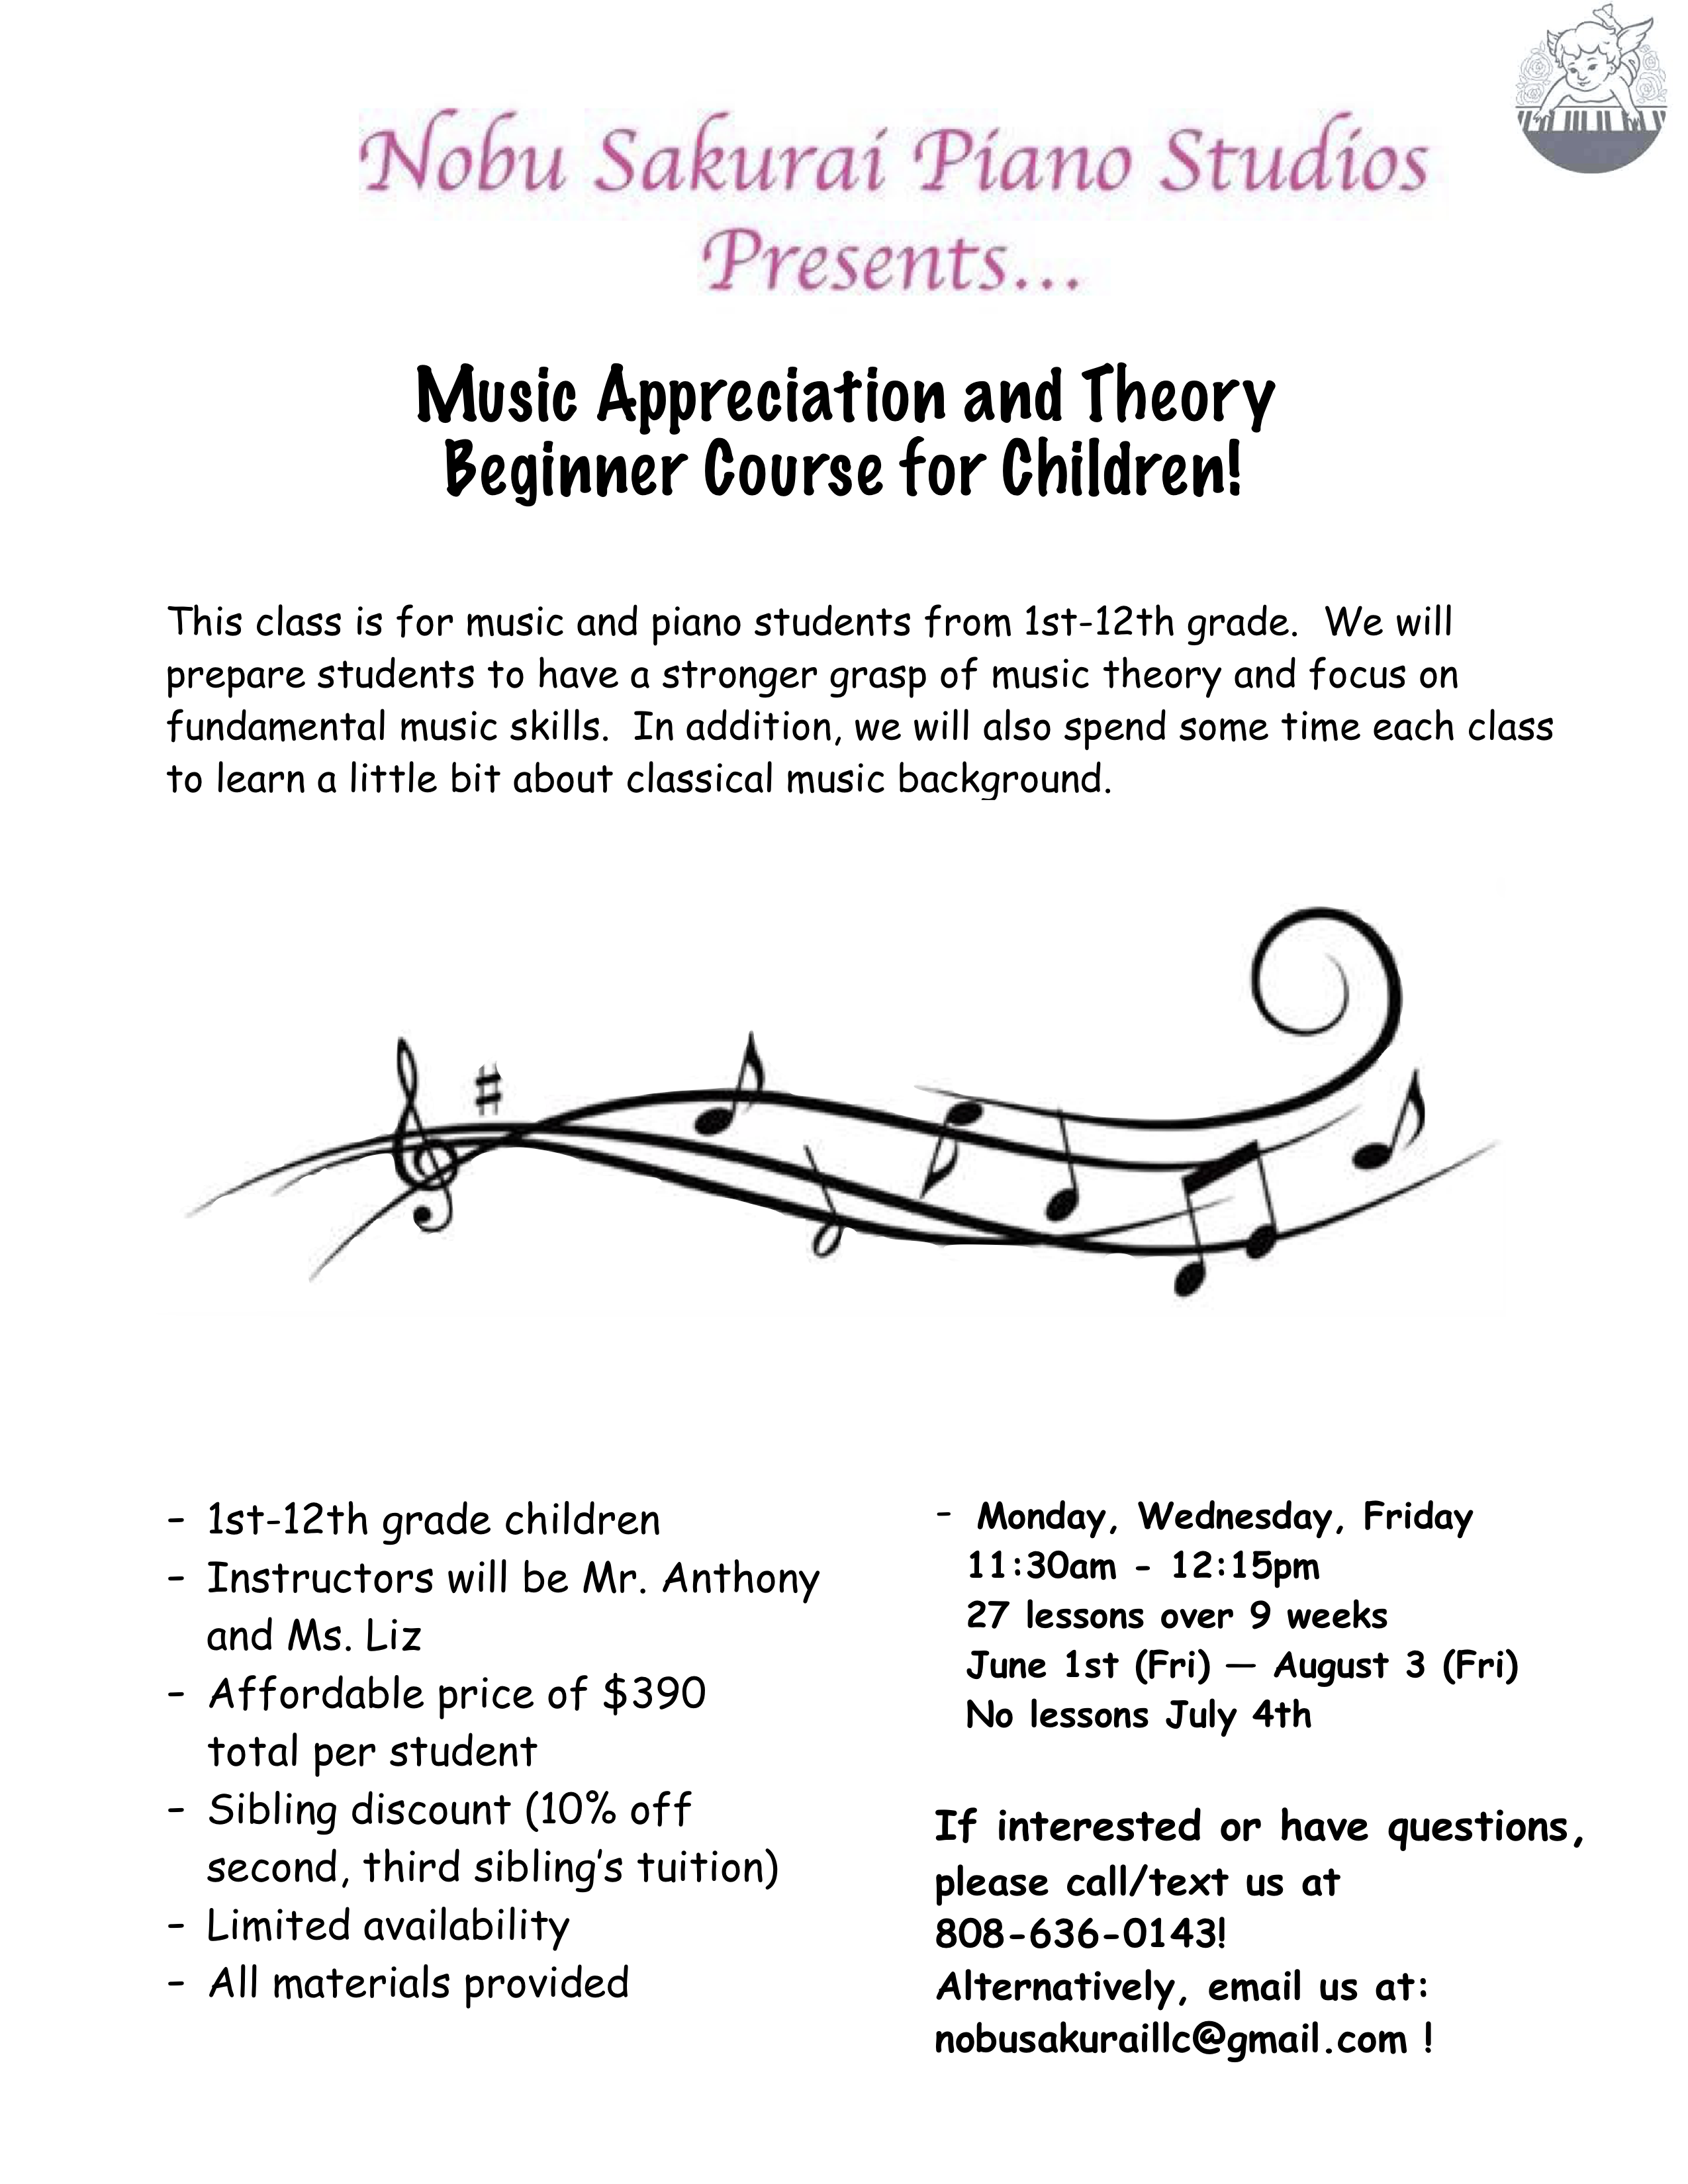 Music Appreciation and Theory Beginner Course for Children!